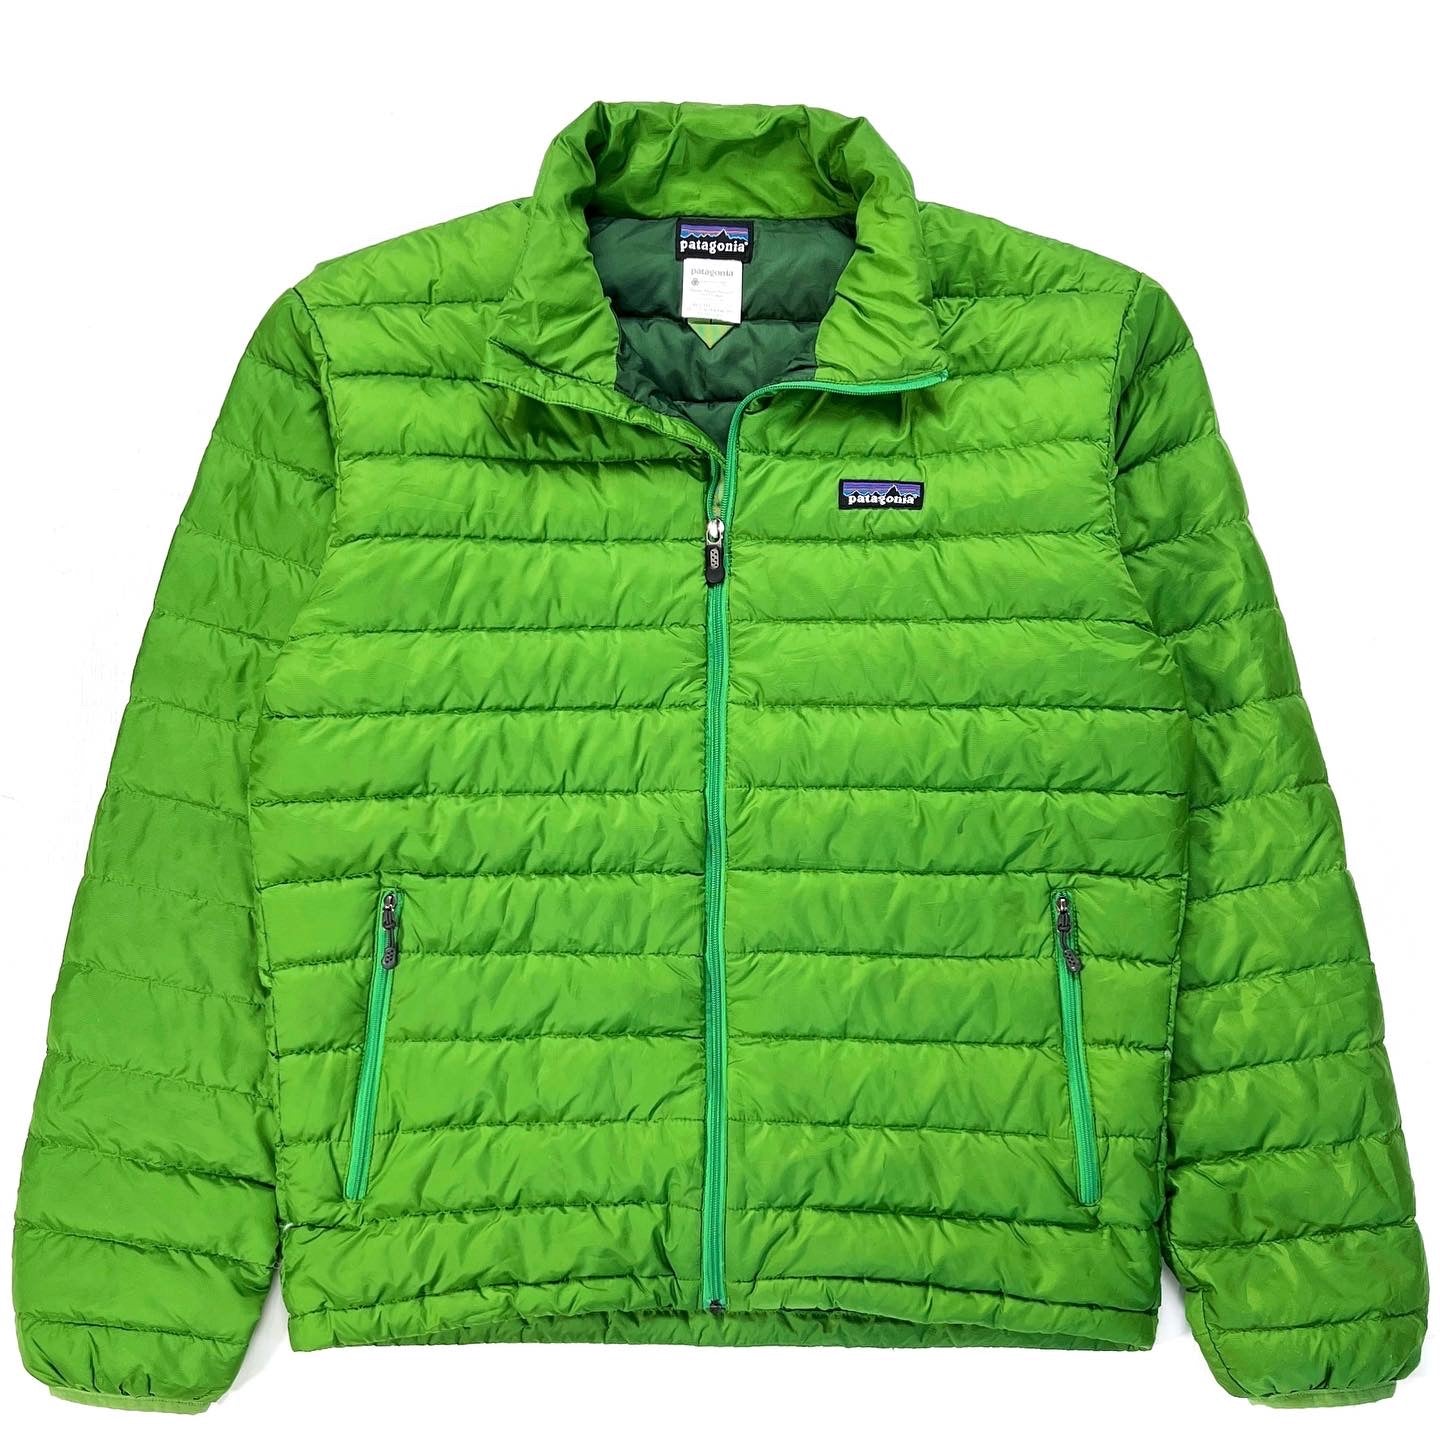 2011 Patagonia Mens Ultralight Down Jacket, Fennel (S/M)